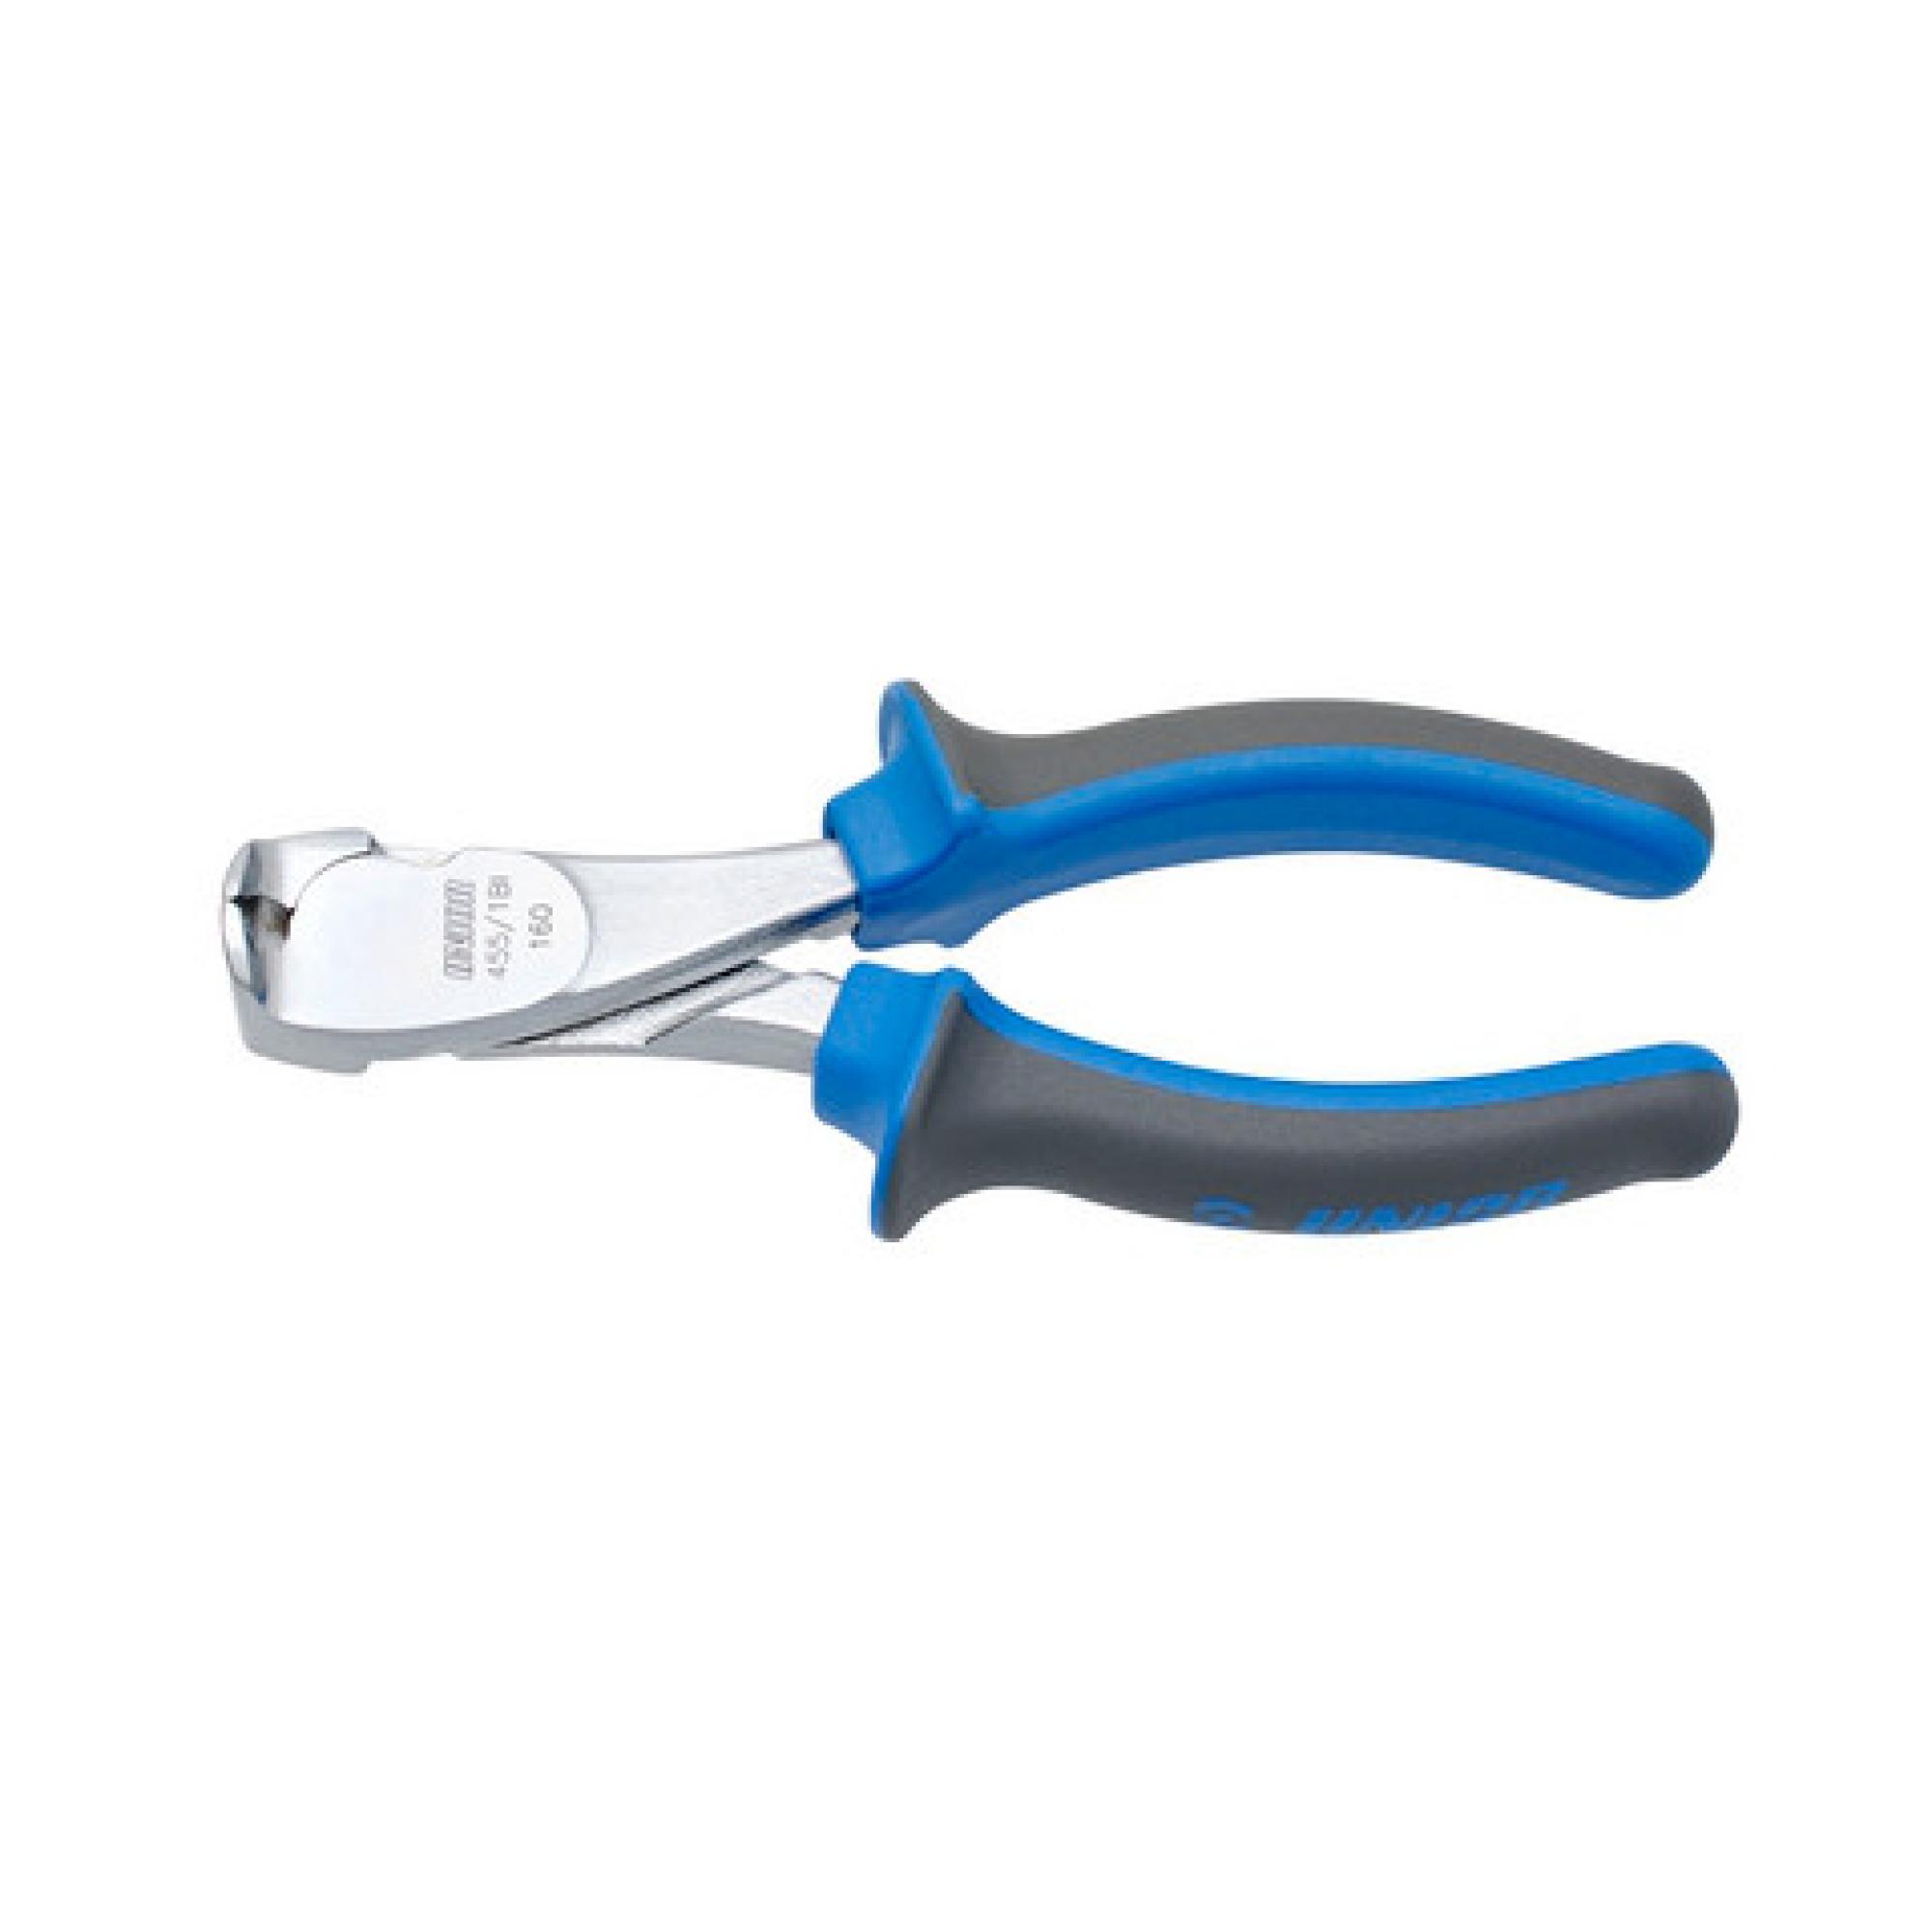 End cutting nippers